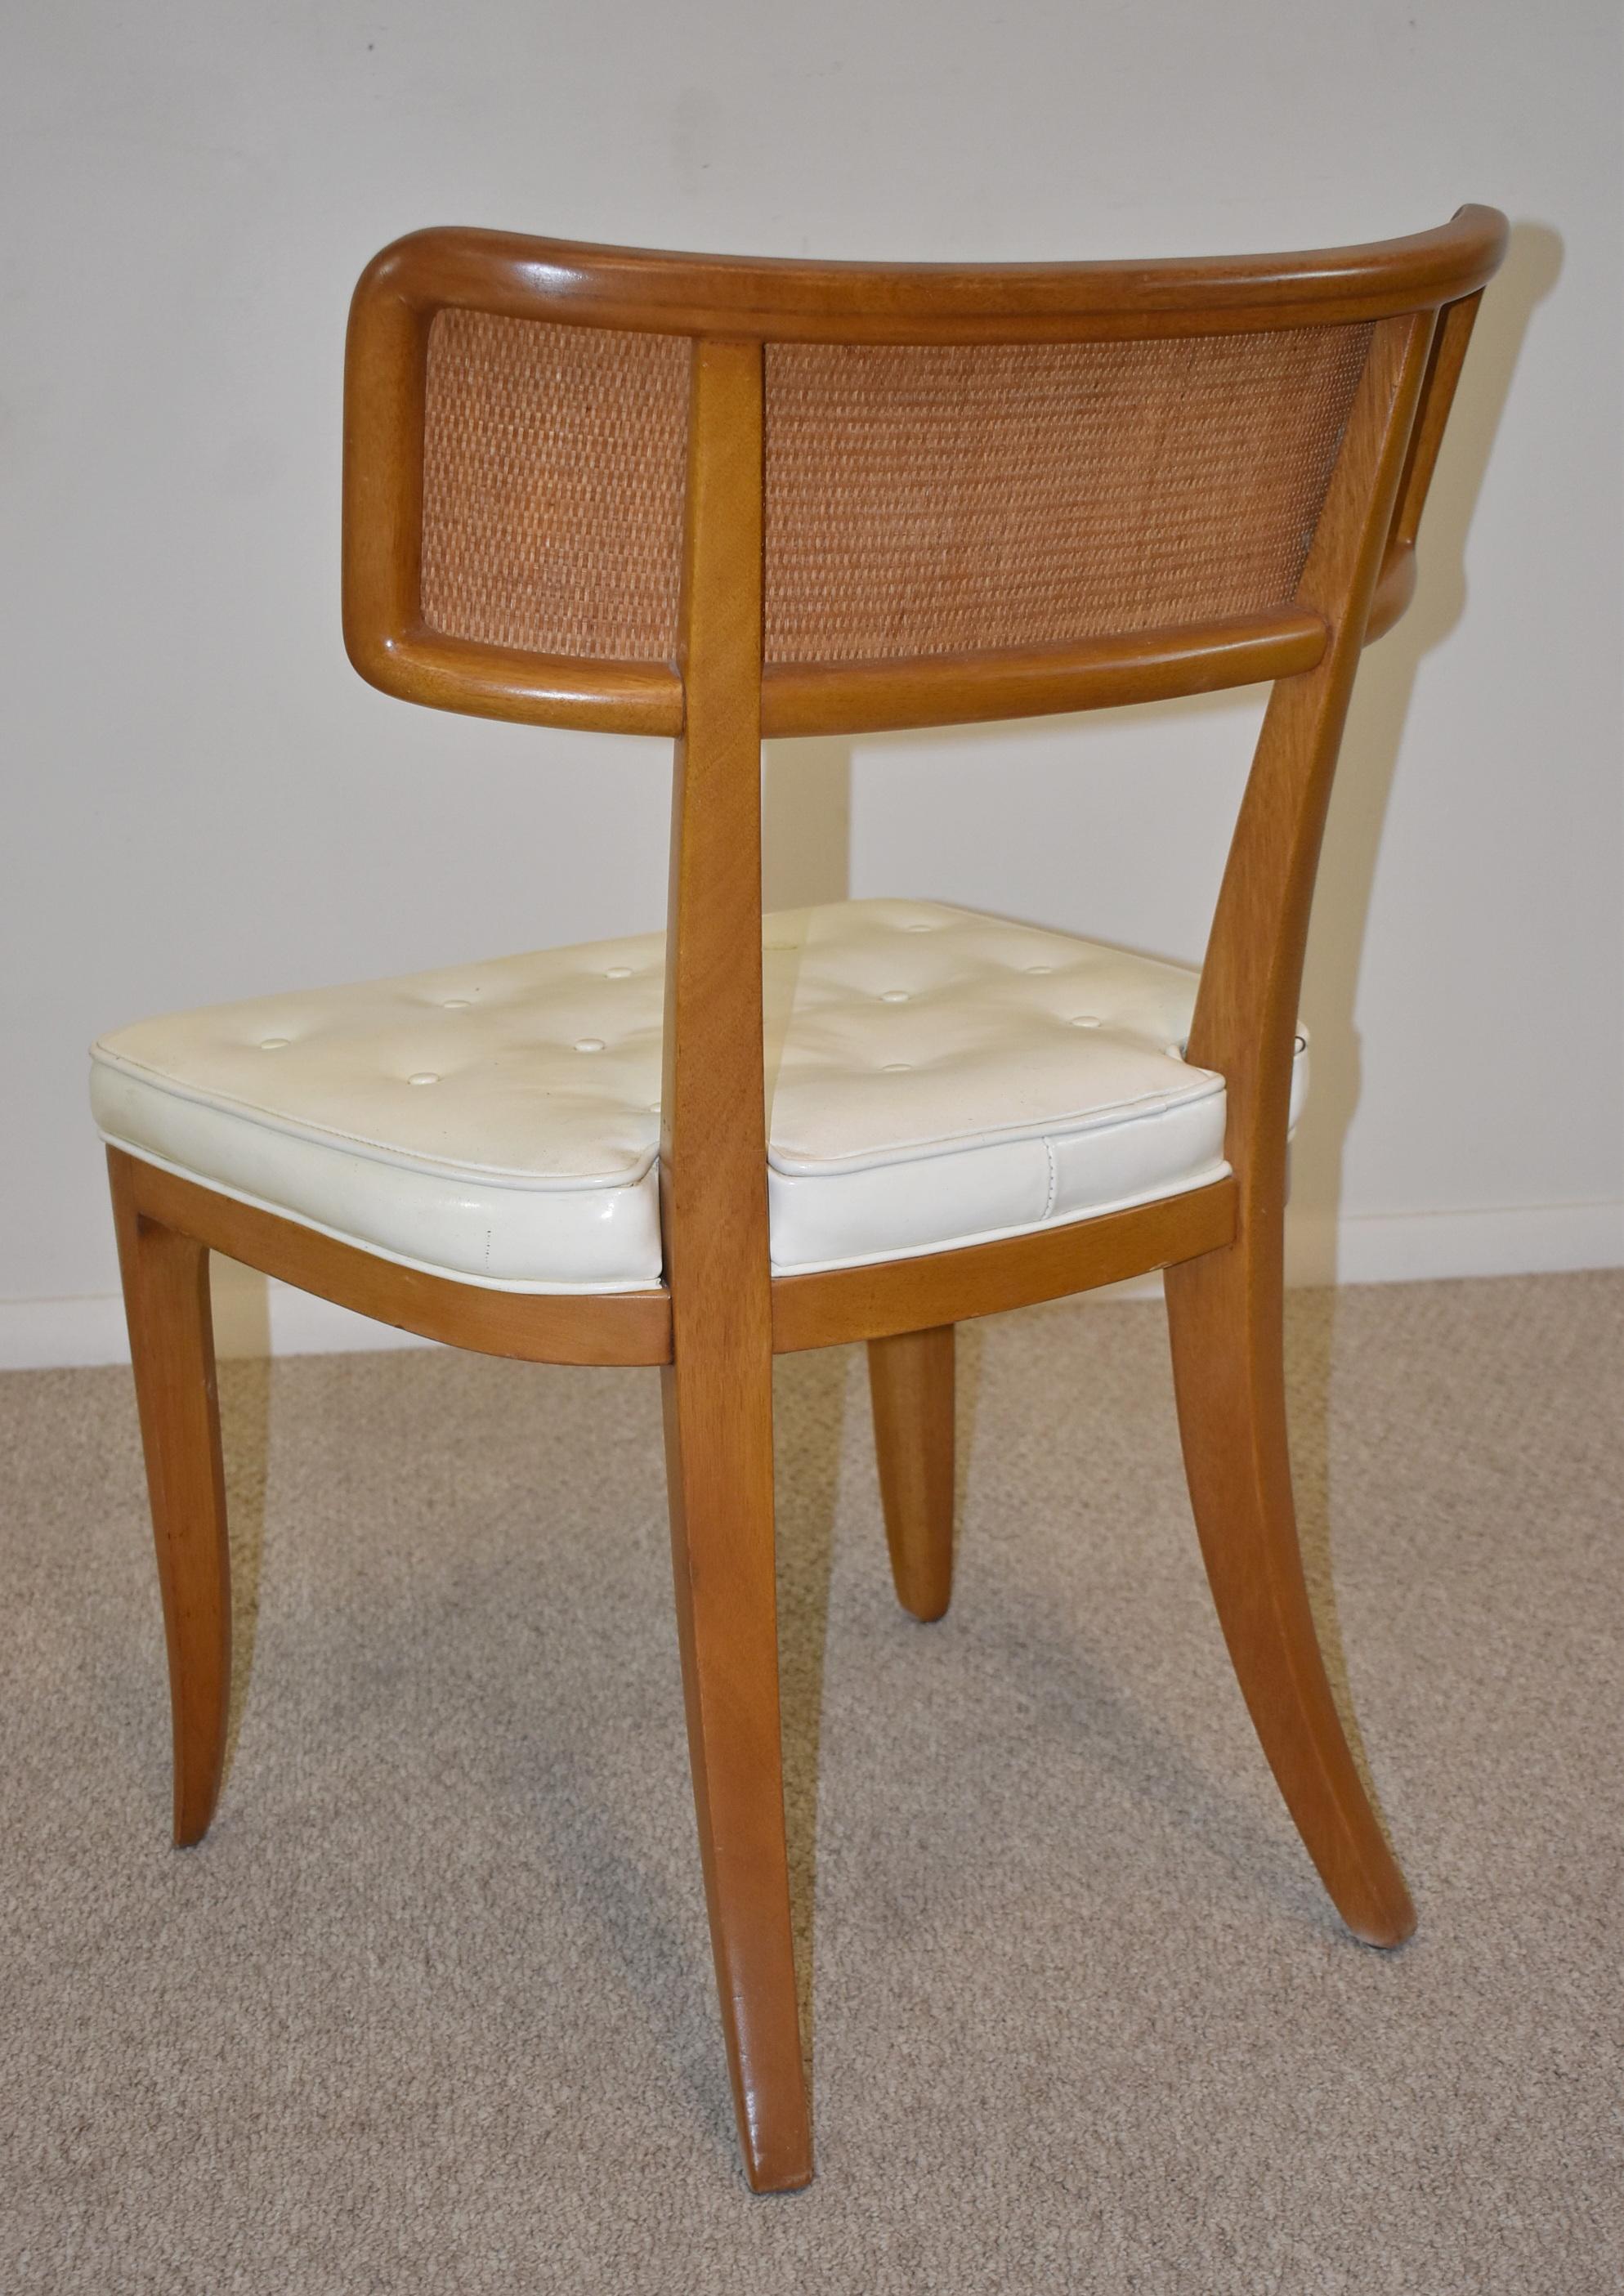 20th Century Six Vintage Dunbar Dining Chairs Cane Back Edward Wormley Design, circa 1950's For Sale